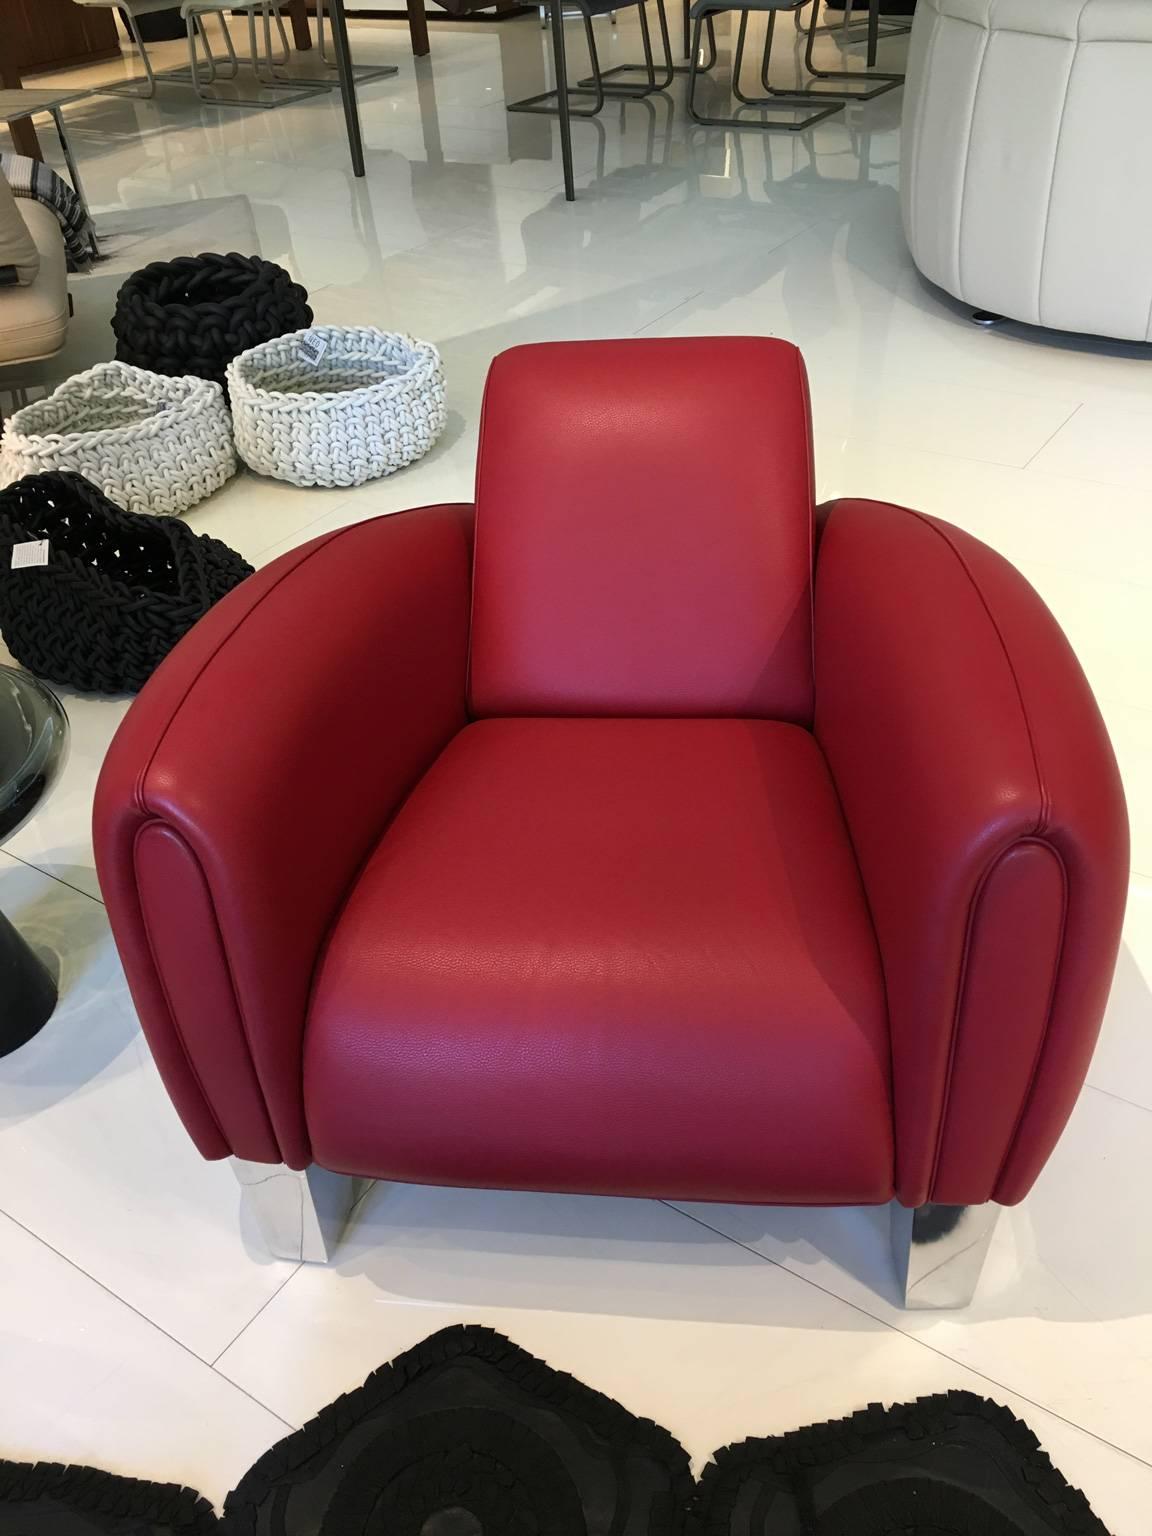 Leather lounge chair with design and seating comfort inspired by a 1930s racing car. Armchair upholstered in living leather, color Scarlet with a polished aluminum base.

Designed by Franz Romero for De Sede
Manufactured in Switzerland, 2010.
 